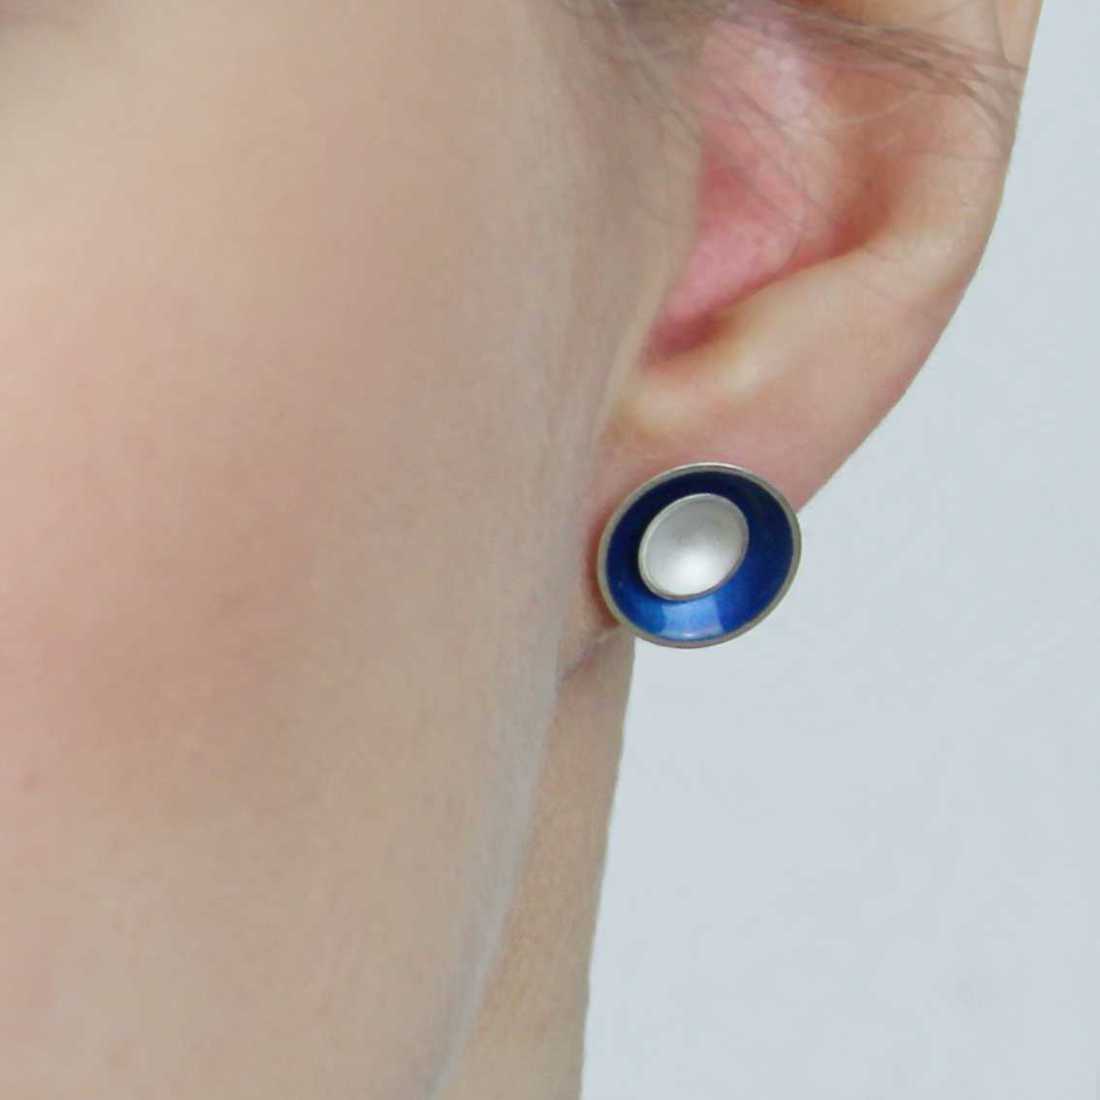 Large Enamel and Silver Target Studs - Outer Enamel